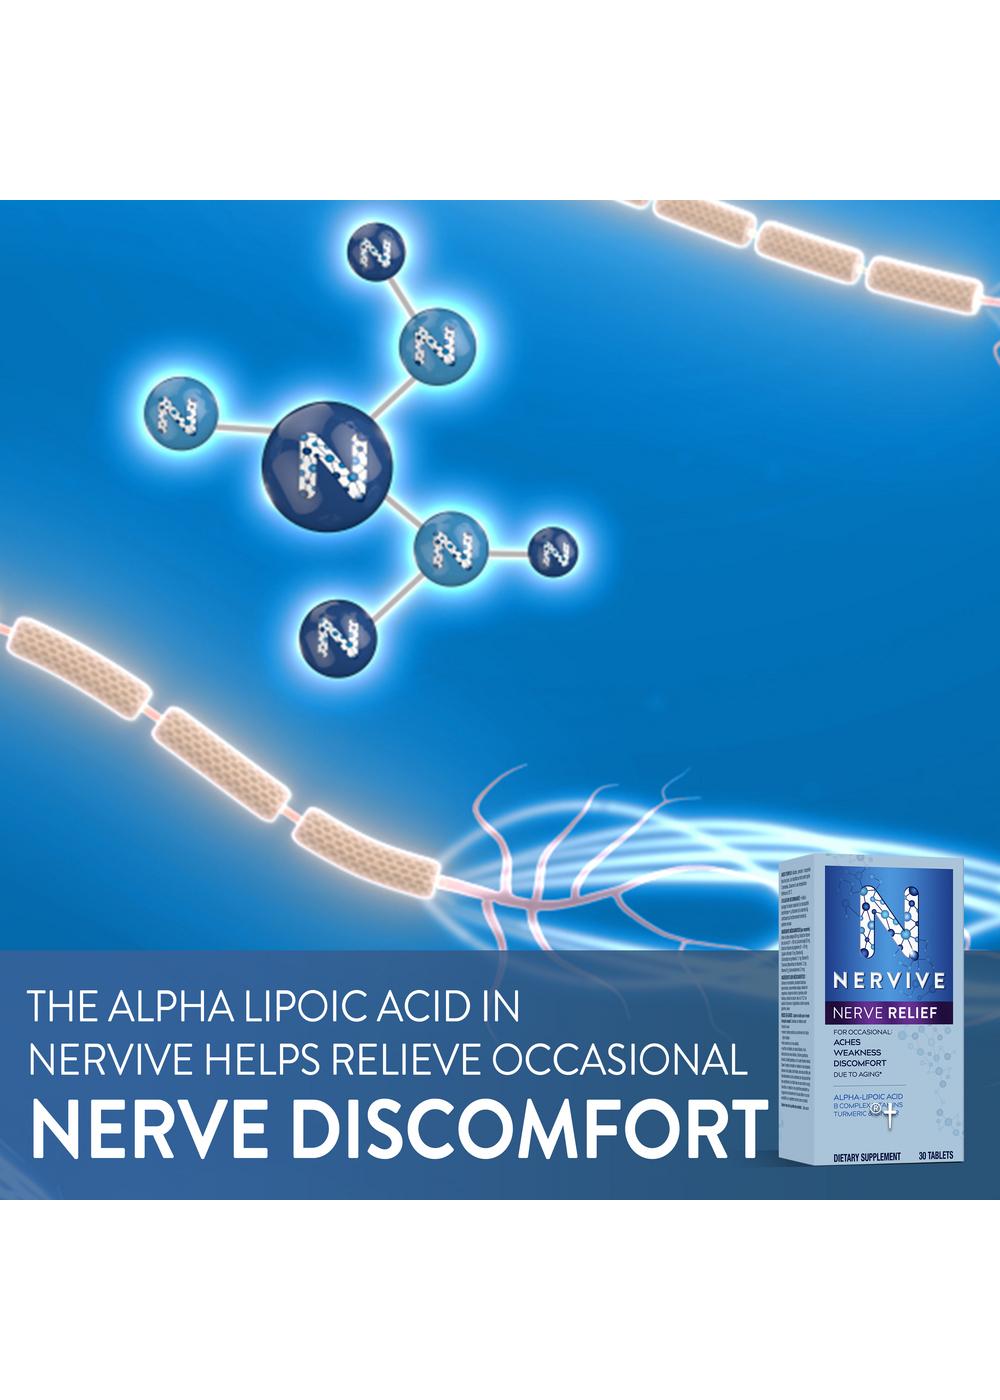 Nervive Nerve Relief with Alpha Lipoic Acid Tablets; image 9 of 11